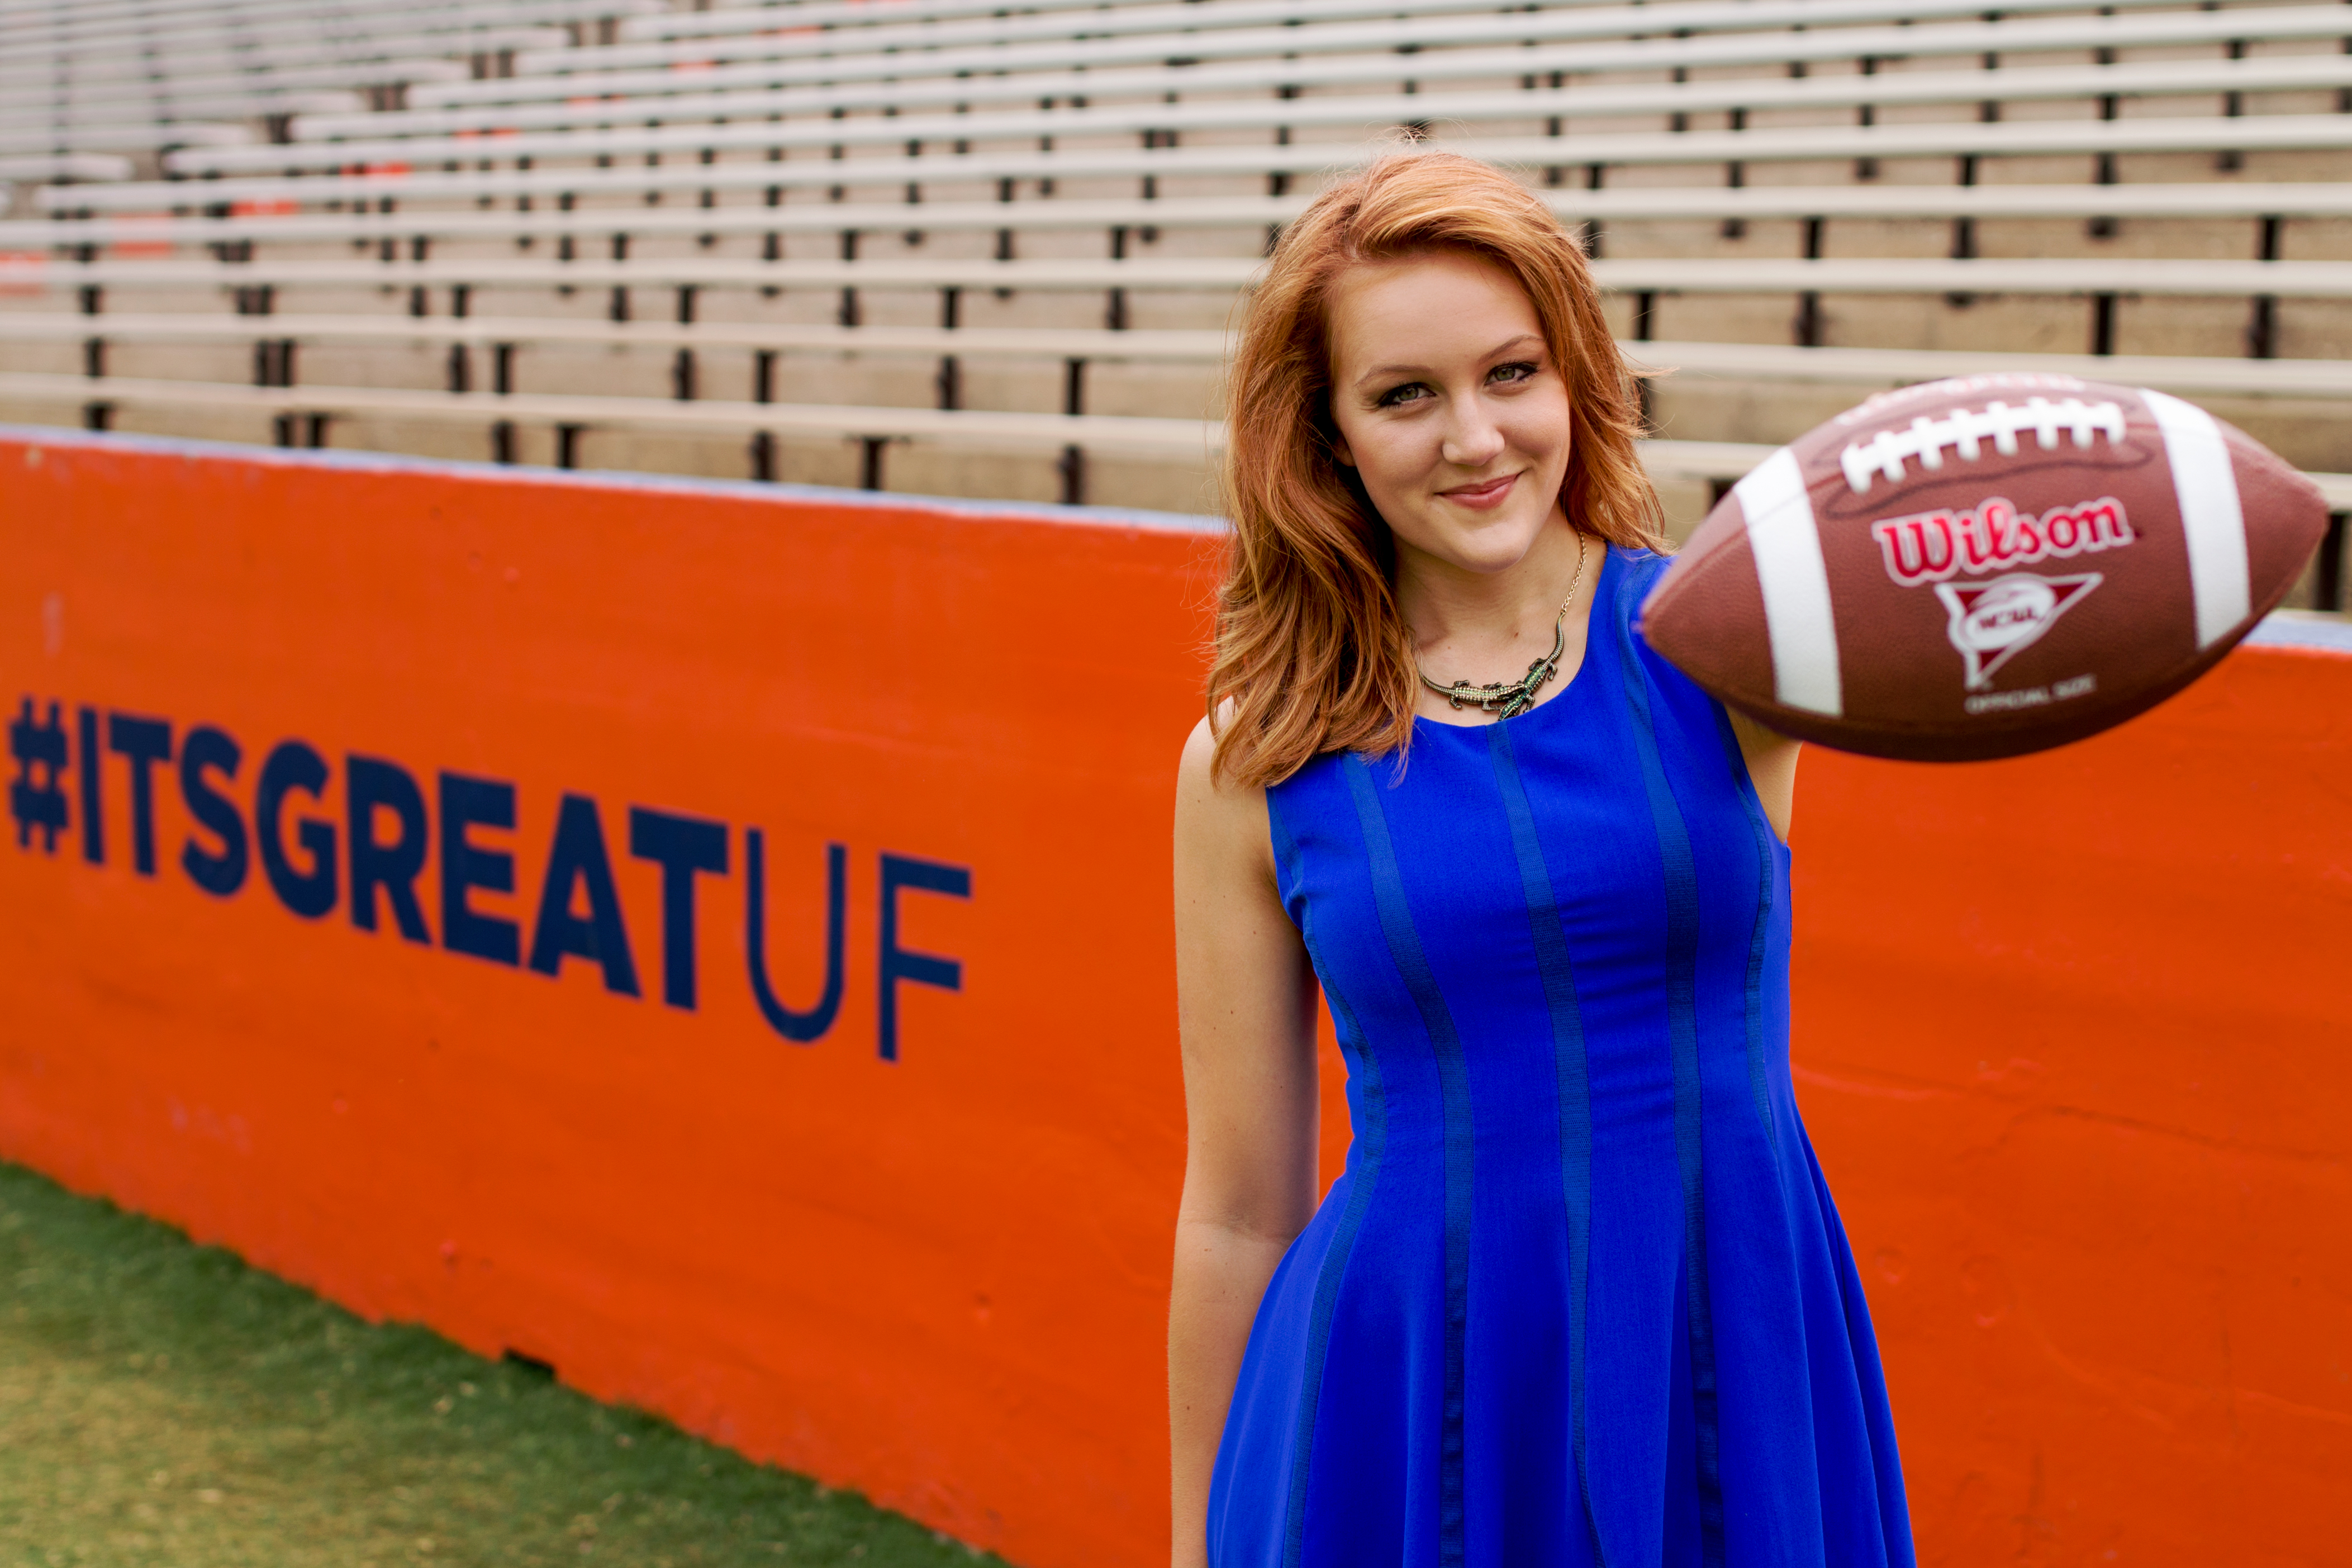 Florida girl going north: New Multimedia Journalist for the Detroit Lions